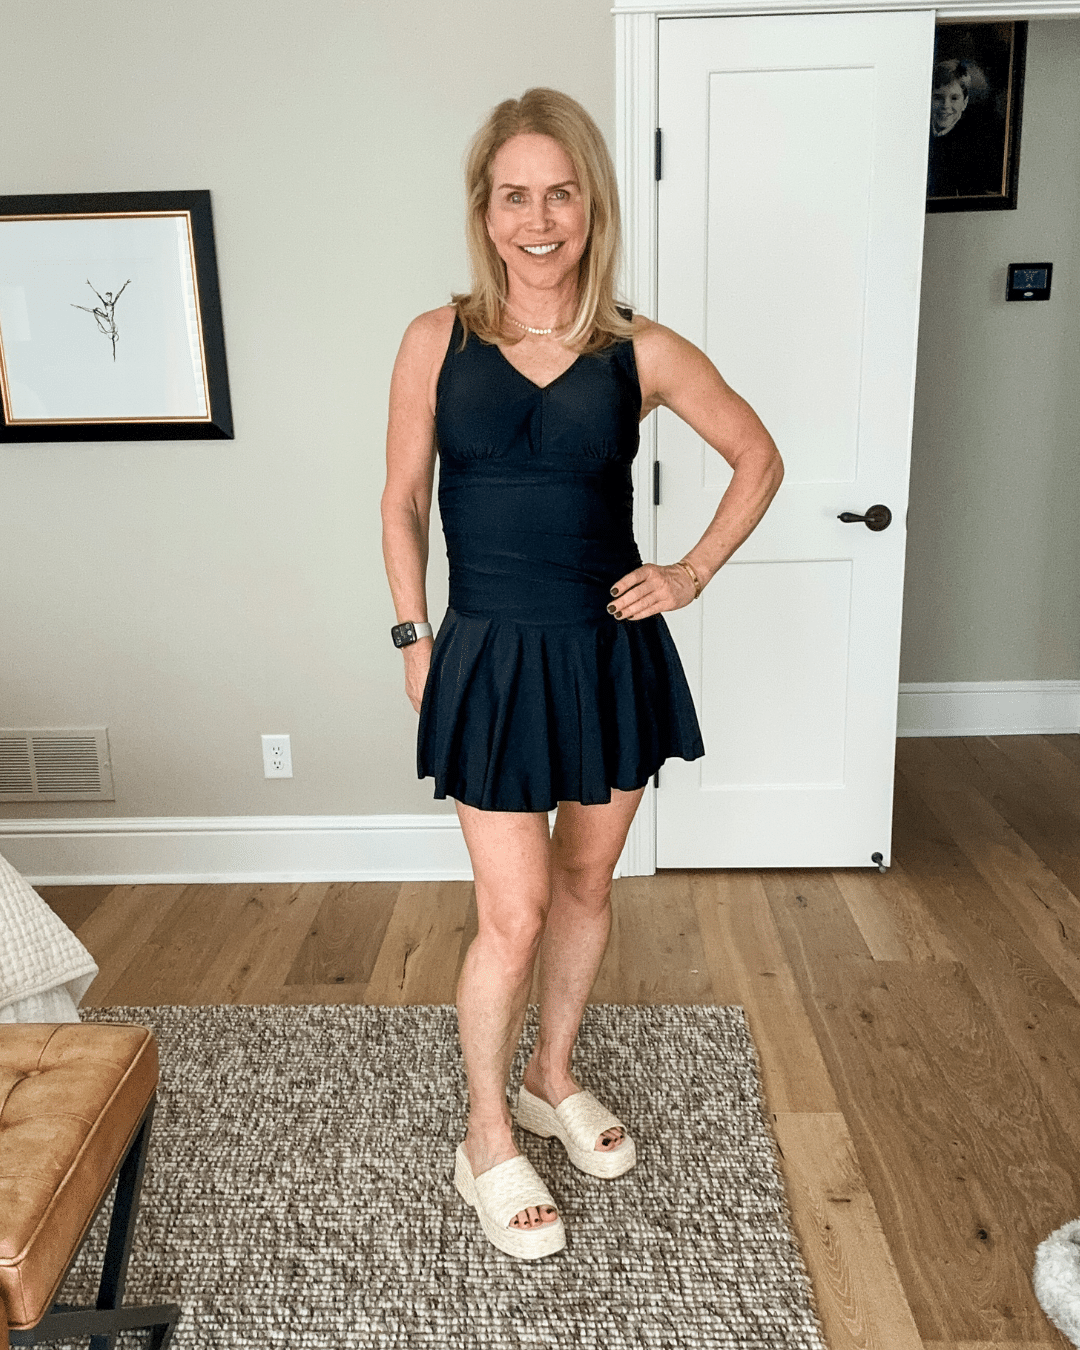 Chris Freytag wearing a full coverage woebegone swim suit for women over 50. One piece coverage with a skirt tying to it. 